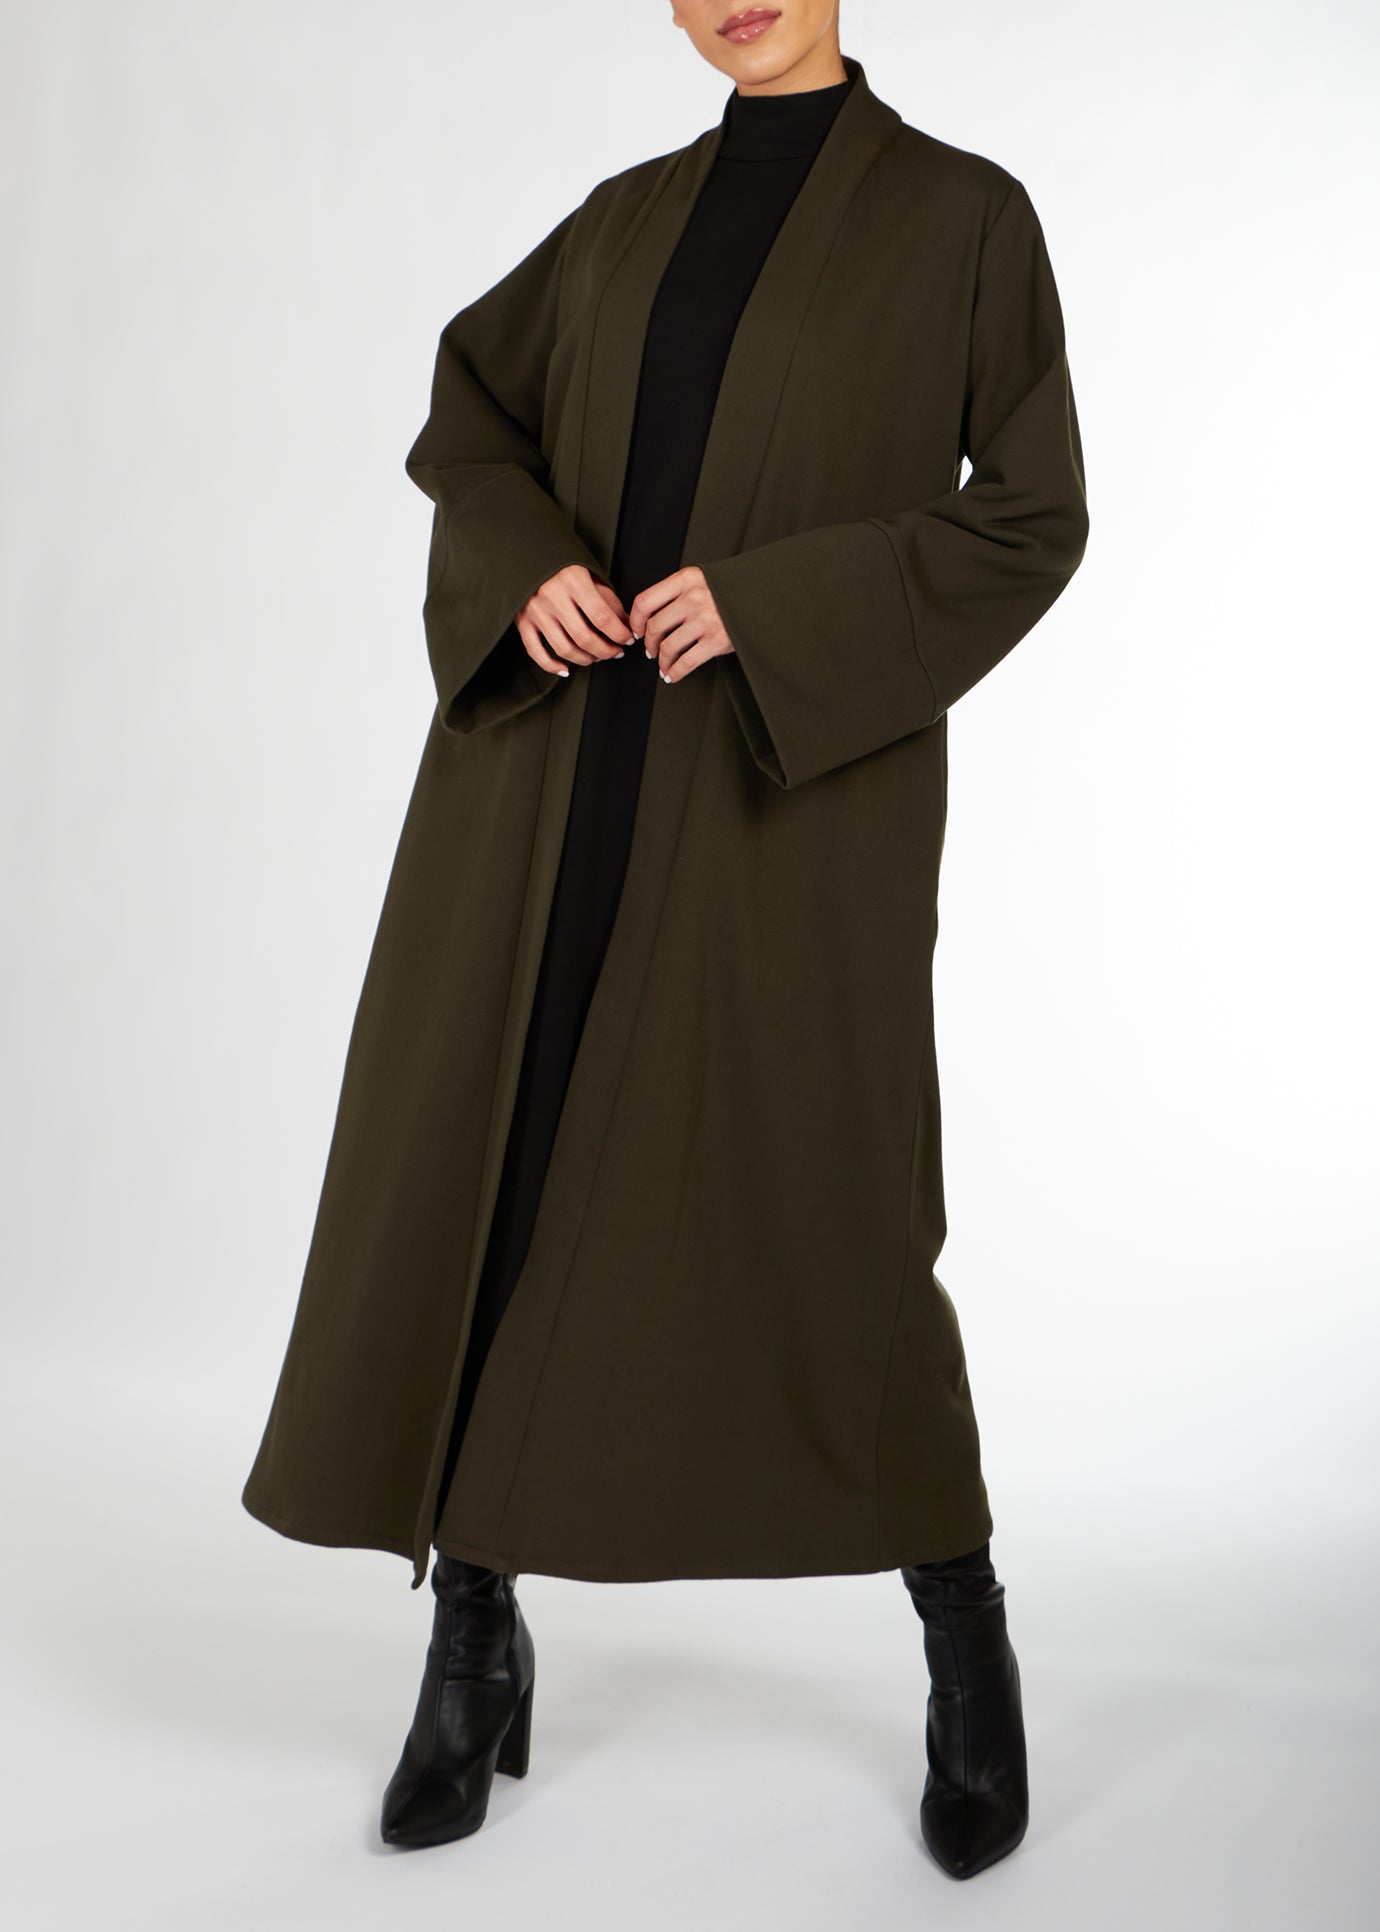 Loose Fit Fleece Cover Up Olive | Coats & Cover Ups | Aab Modest Wear